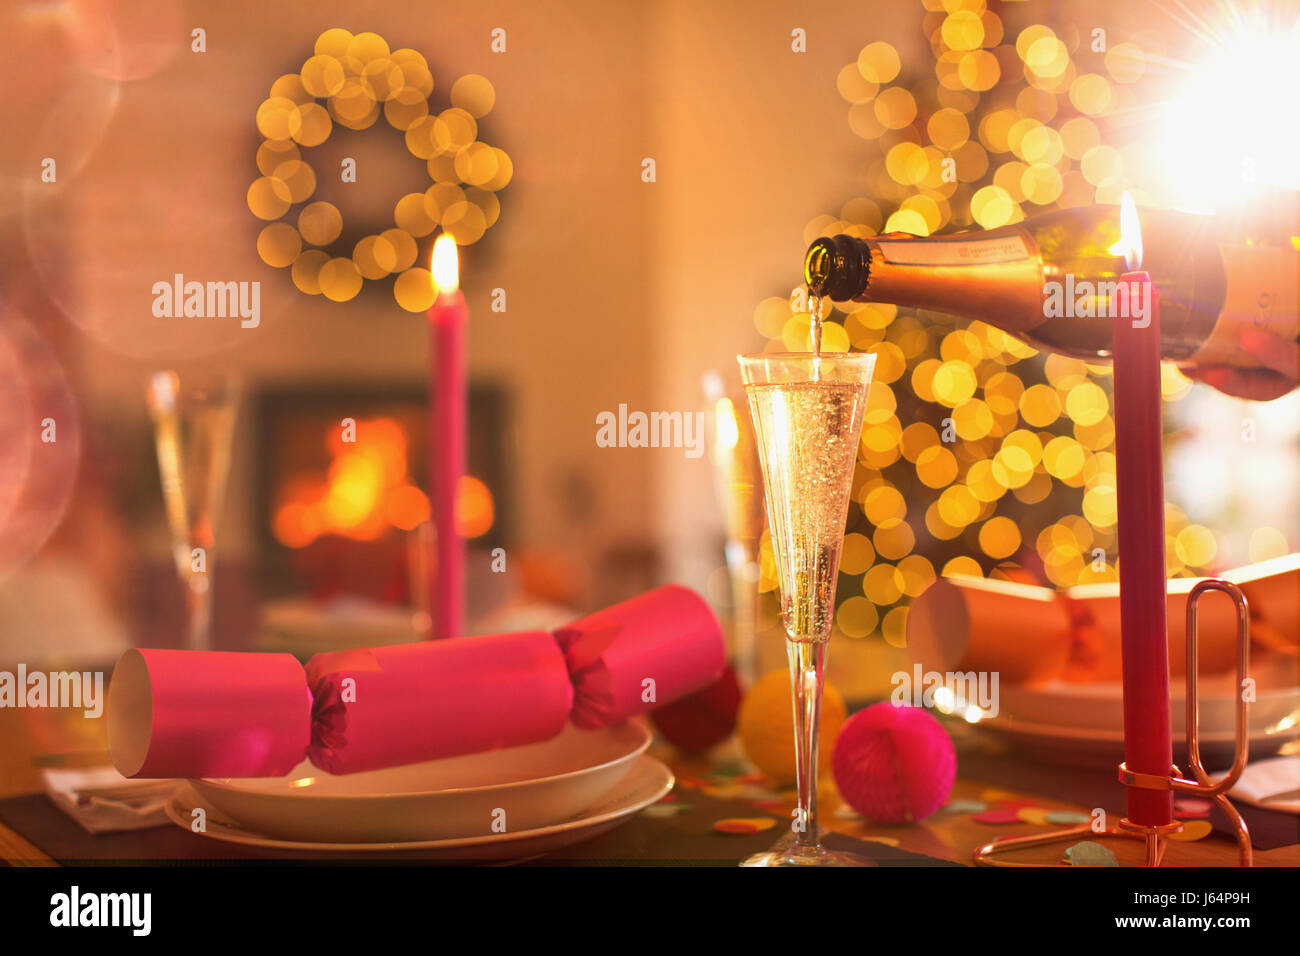 Pouring champagne into champagne flute on Christmas dinner table with Christmas cracker Stock Photo